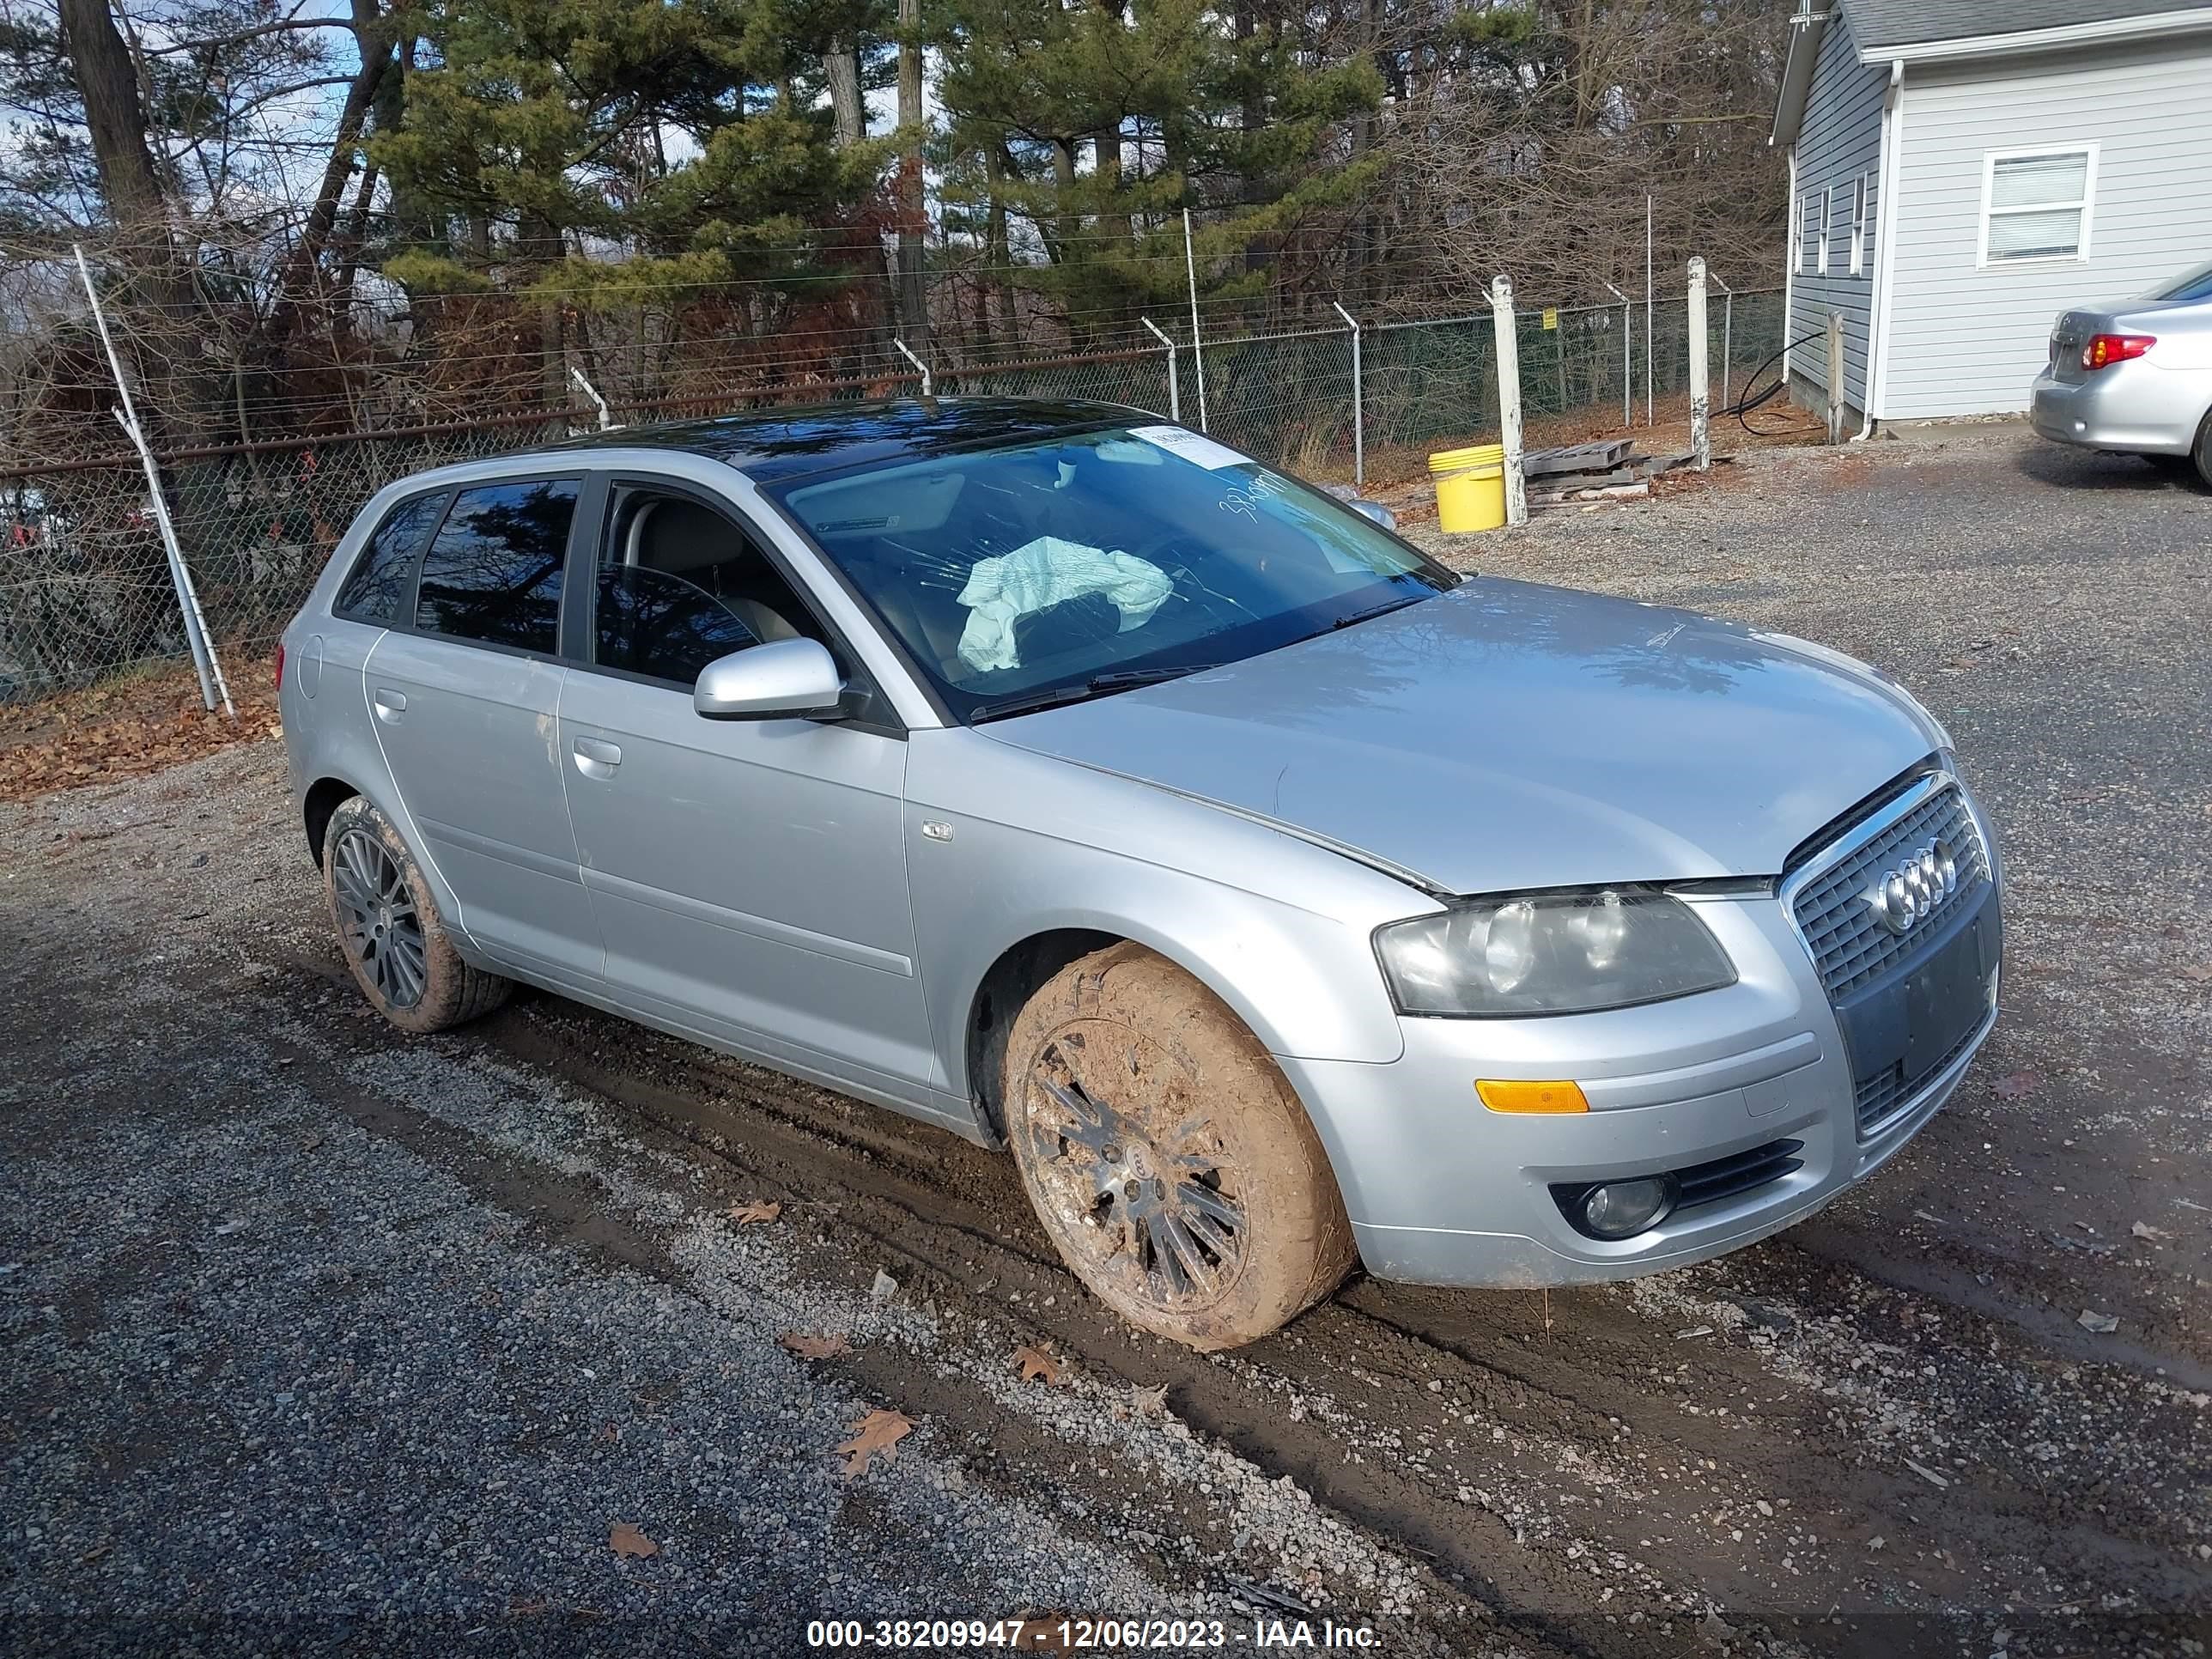 vin: WAUNF78P58A006197 WAUNF78P58A006197 2008 audi a3 2000 for Sale in 44663, 2932 State Route 259 Se, New Philadelphia, Ohio, USA